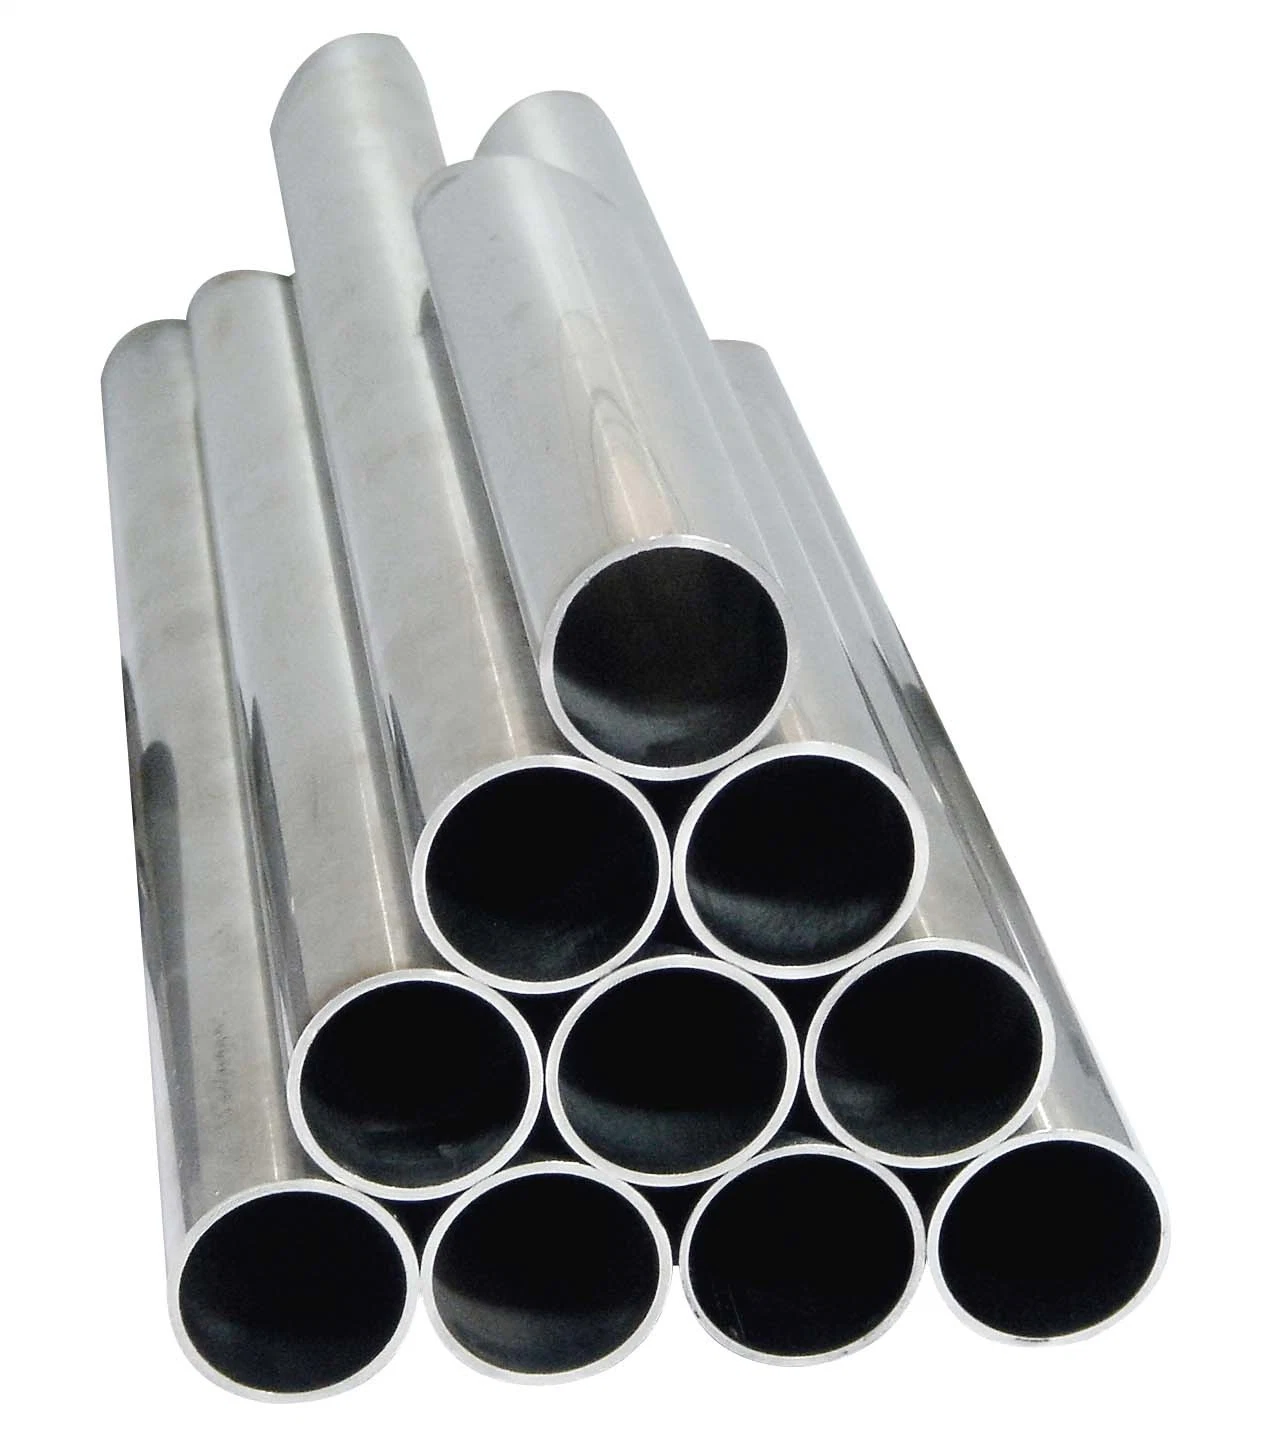 Stainless Steel Seamless Pipe Fitting